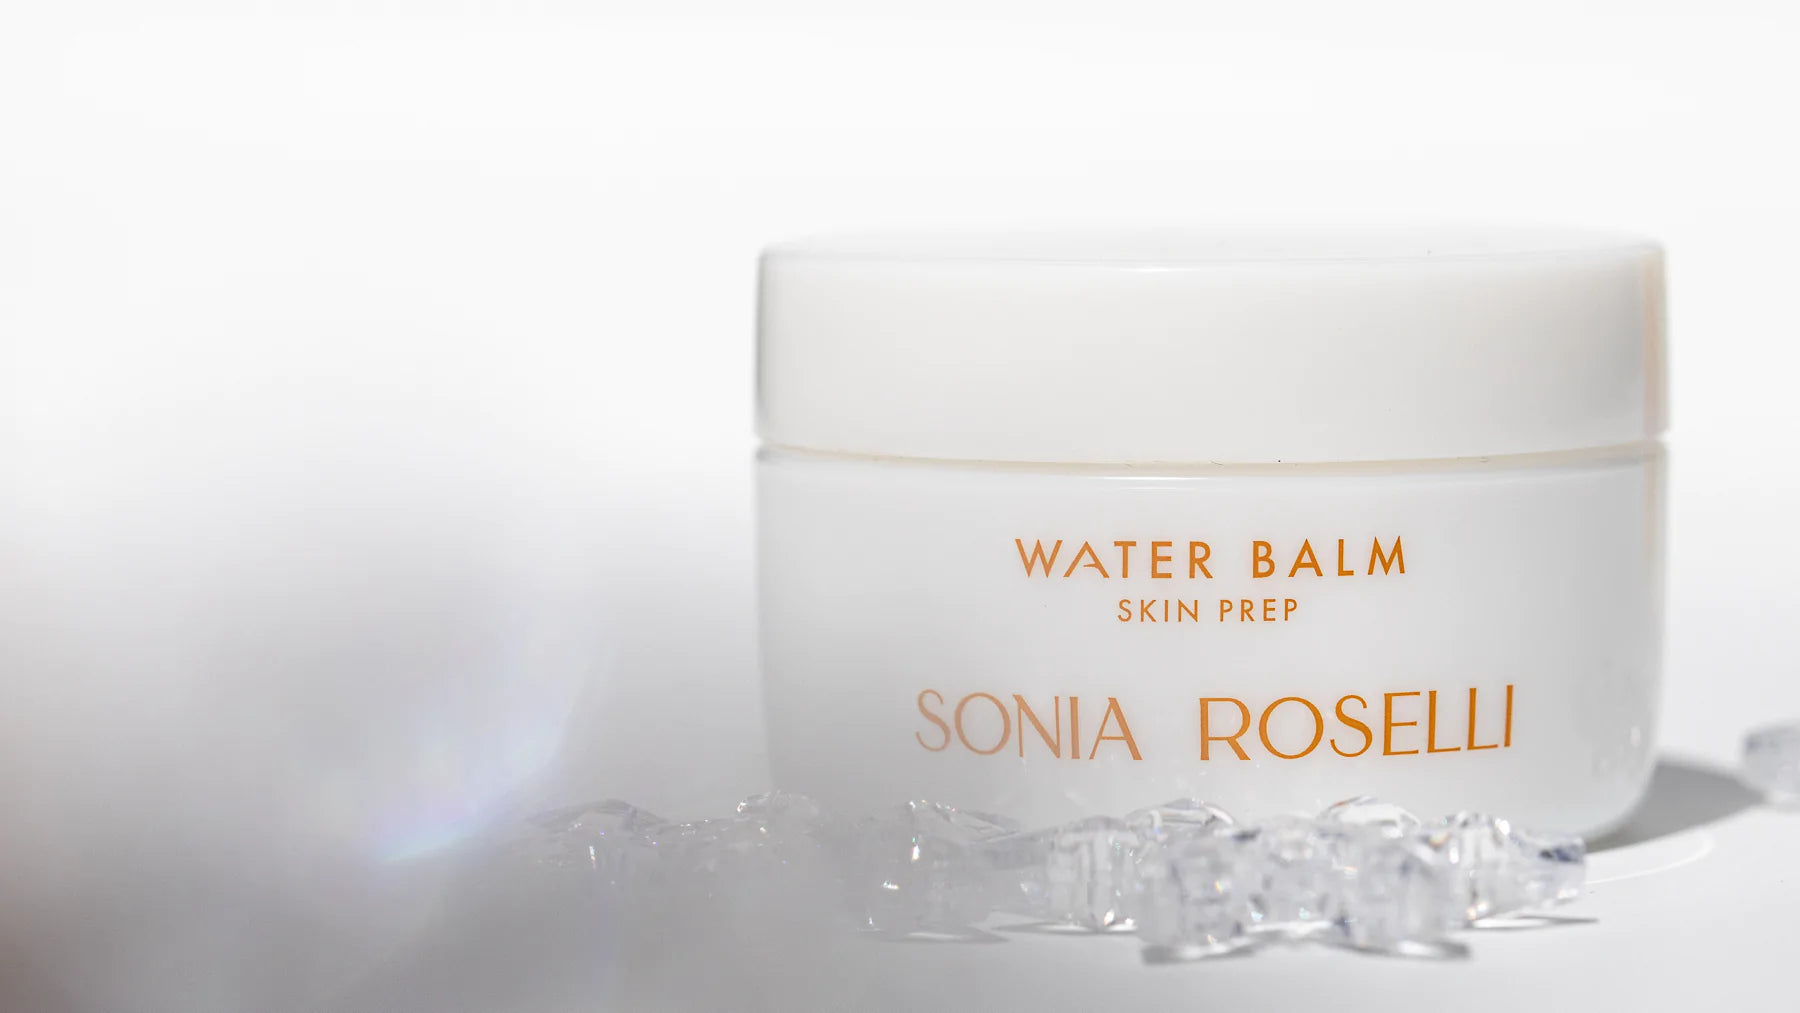 In a captivating product photograph, Sonia Roselli Beauty's Water Balm moisturizer takes center stage. The jar glistens under soft, diffused light, emphasizing the product's luxurious and hydrating qualities, inviting you to experience the rejuvenation and nourishment it offers for your skin